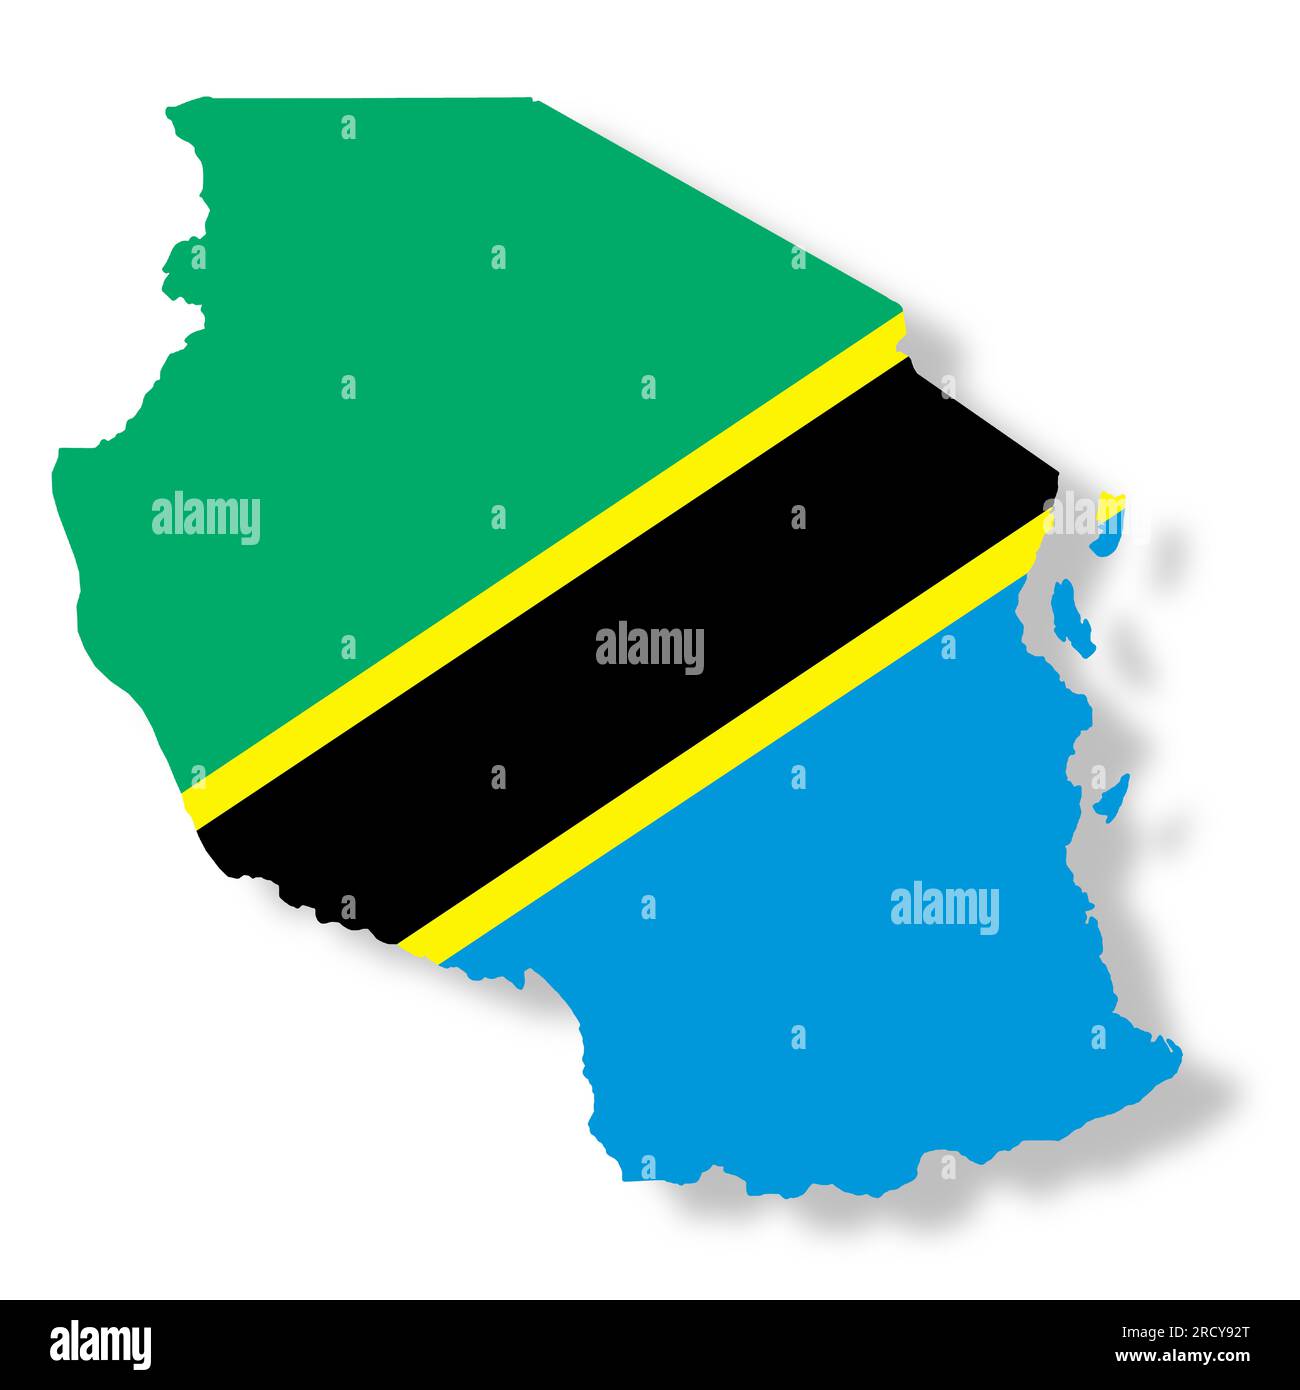 Tanzania flag map with clipping path 3d illustration Stock Photo